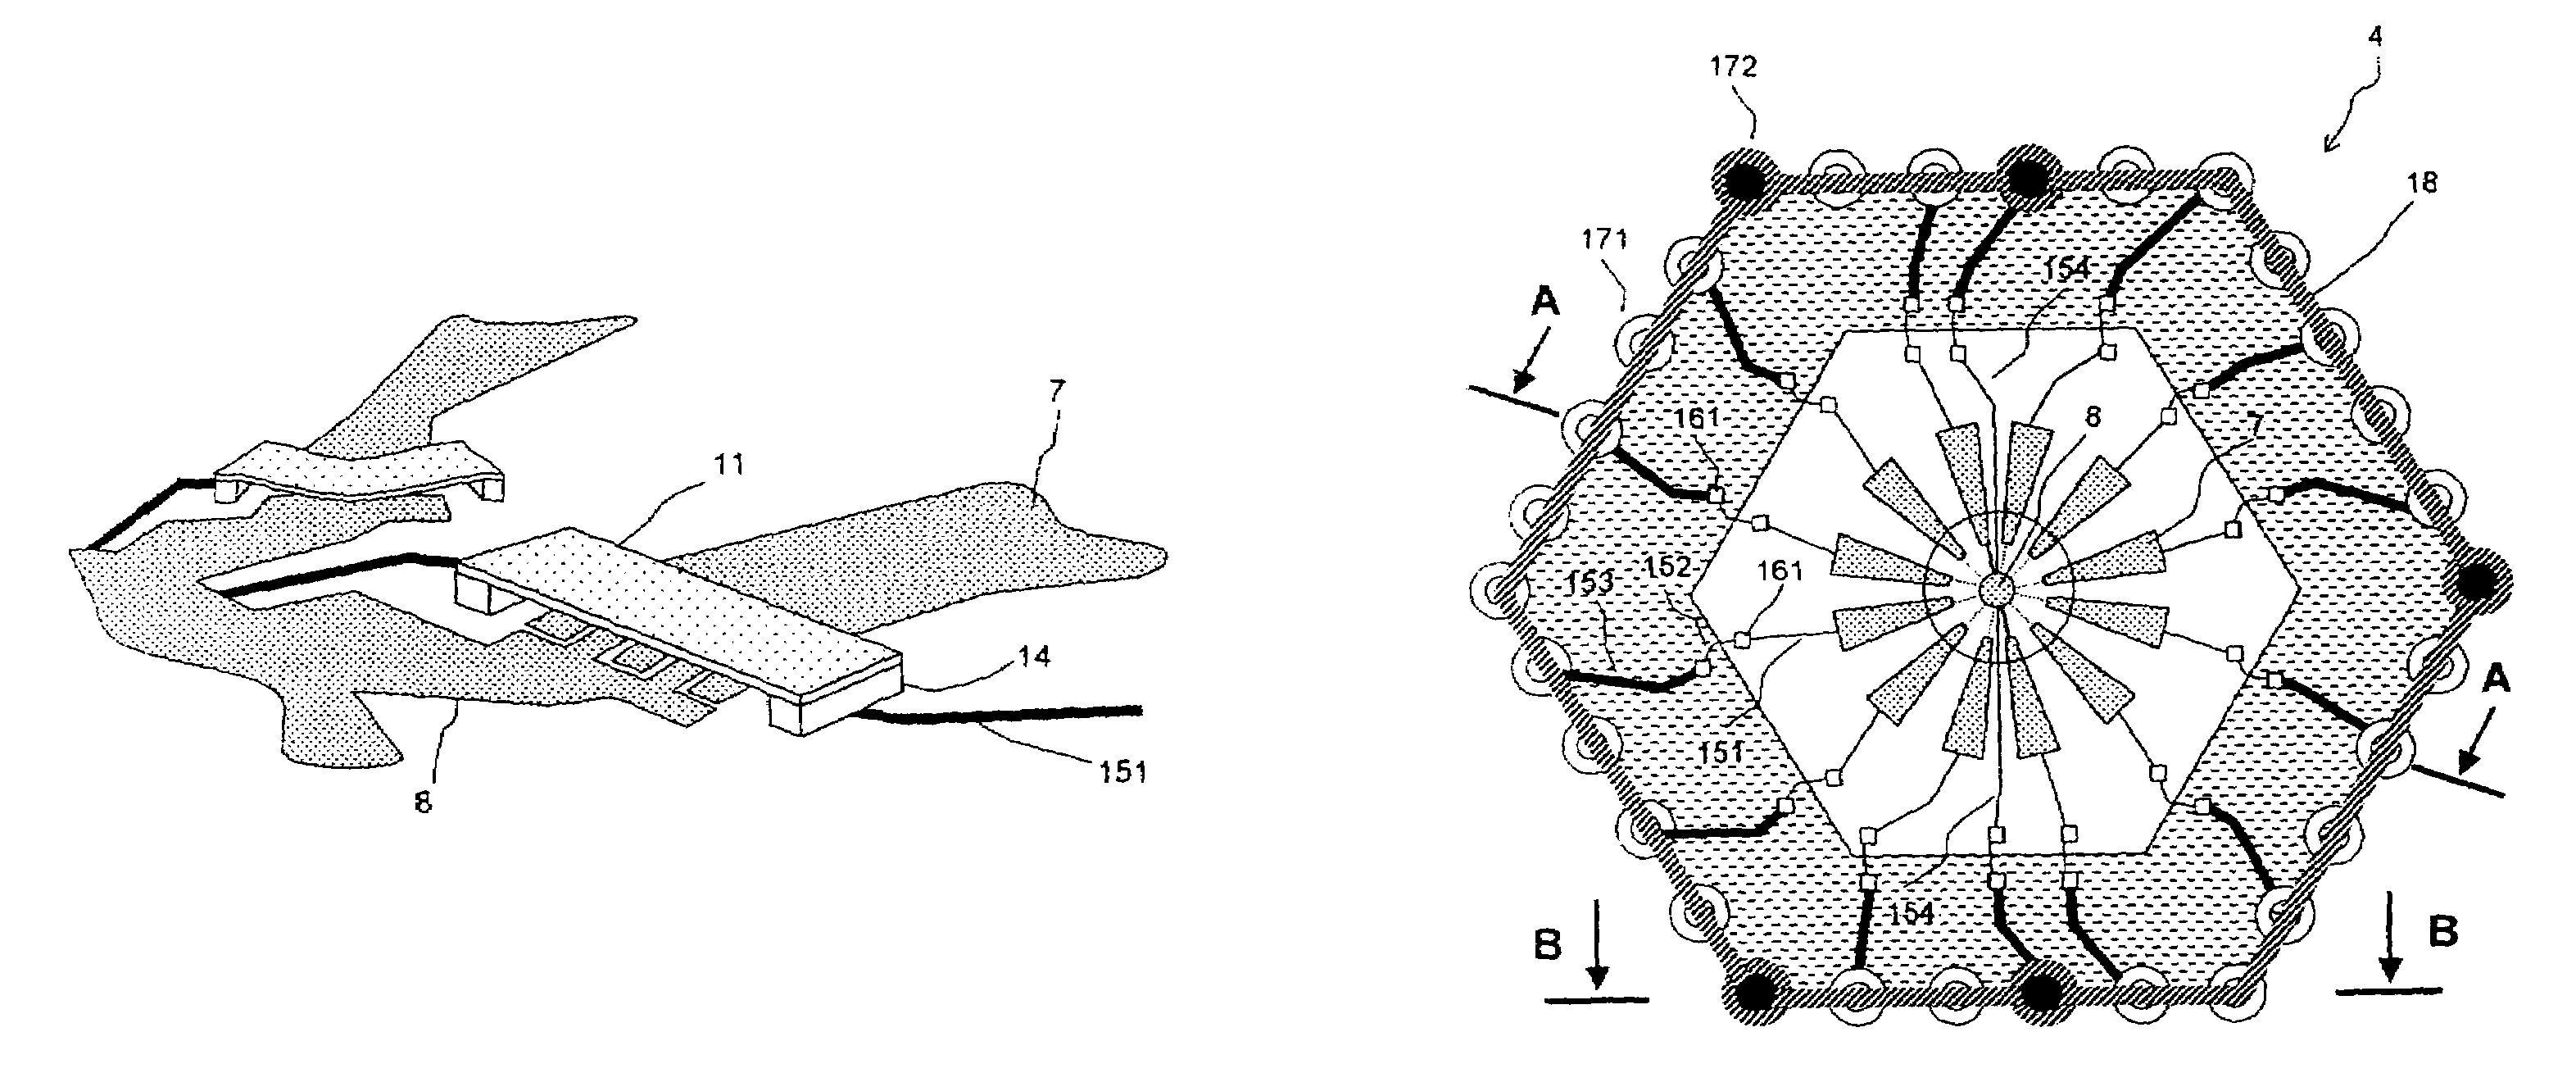 Phase-shifting cell for an antenna reflectarray